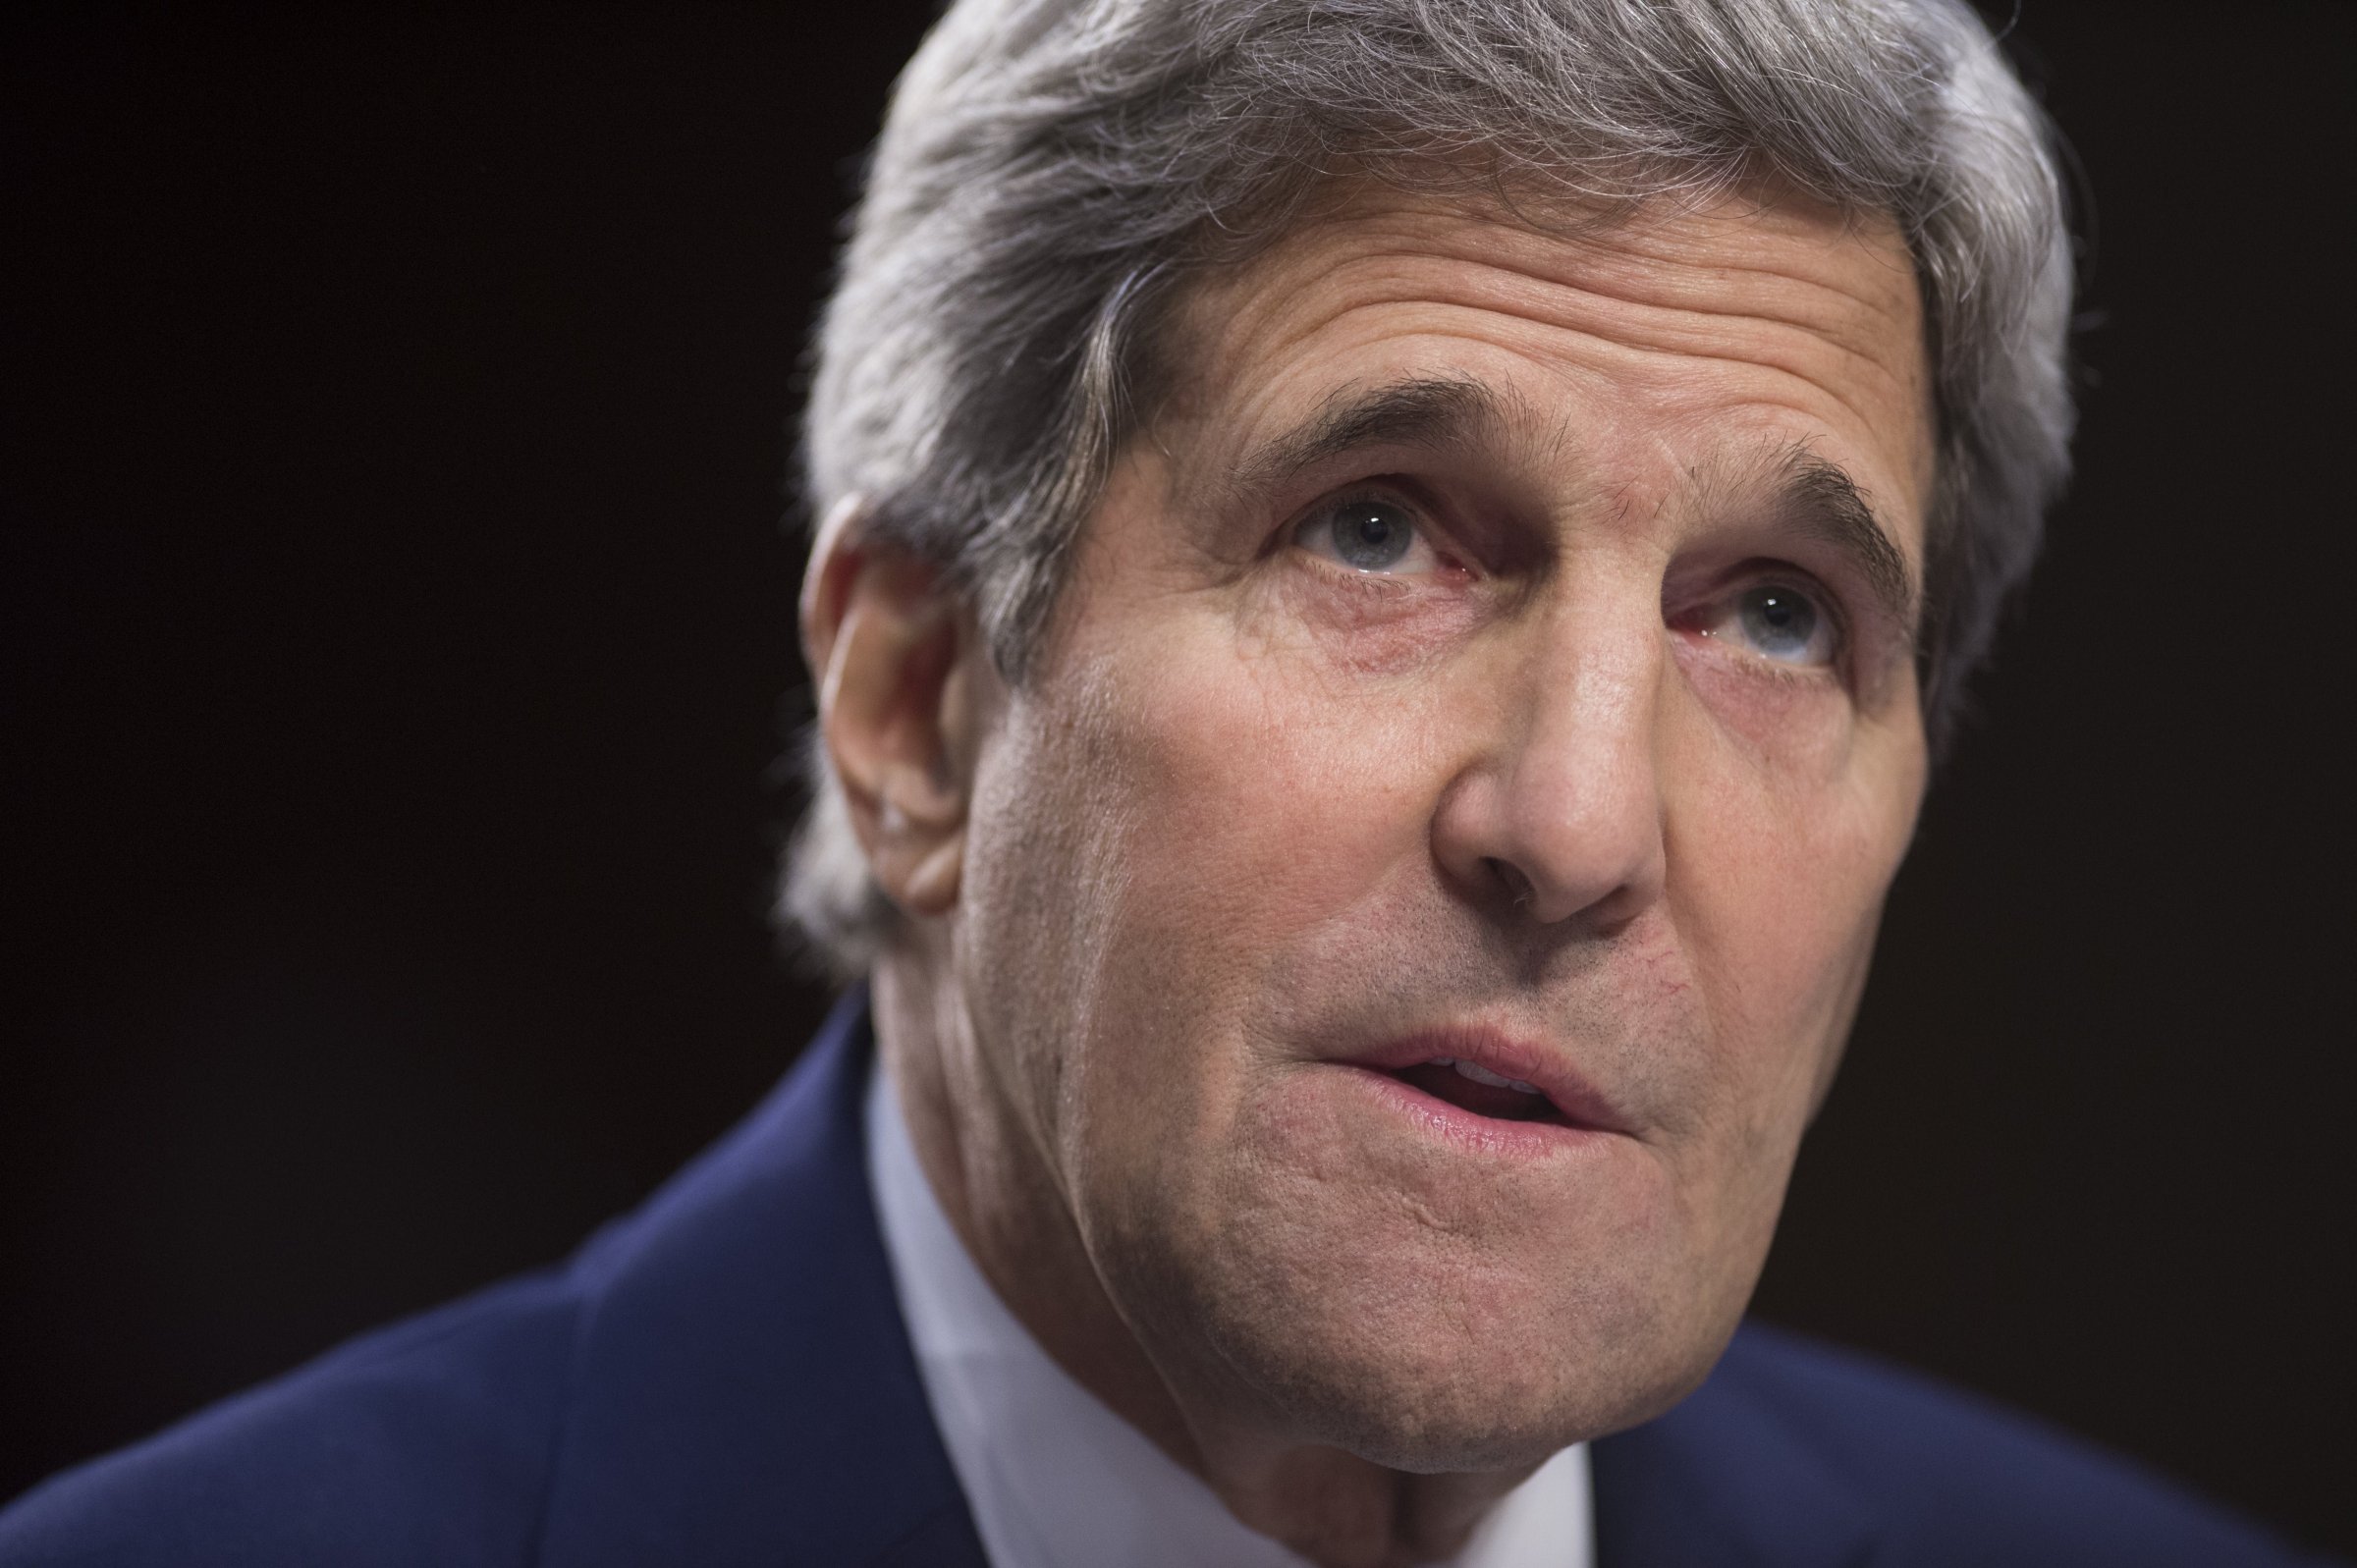 US Secretary of State John Kerry testifies about US policy towards Iraq and Syria and the threat posed by the Islamic State Group (IS) during a Senate Foreign Relations Committee hearing on Capitol Hill in Washington on Sept. 17, 2014.